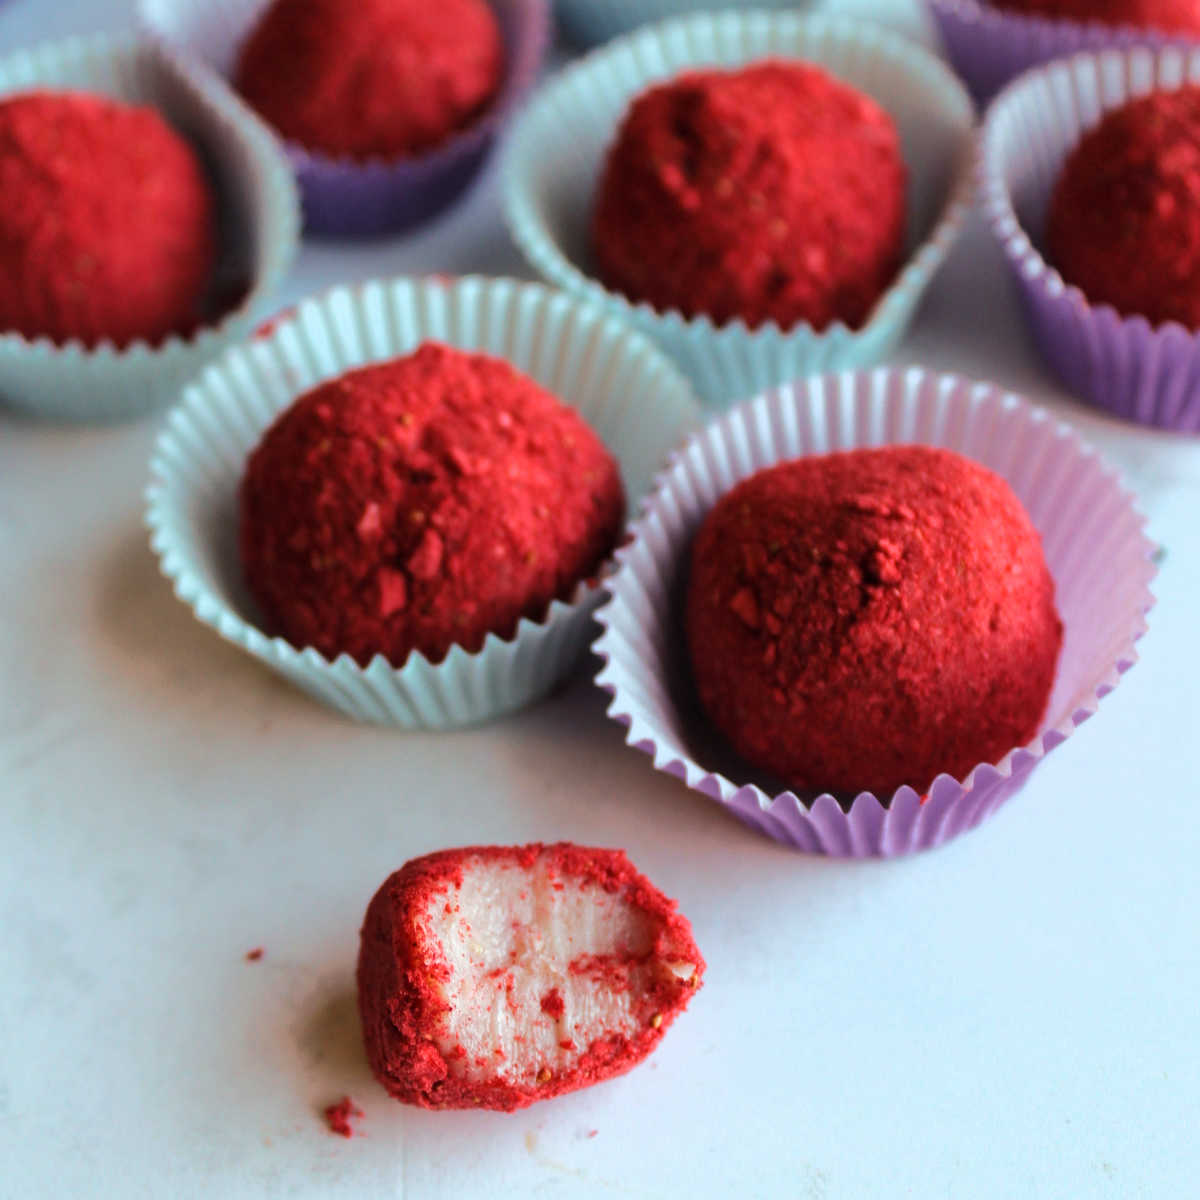 Strawberry brigadeiro with a bite missing showing creamy pink interior and red freeze-dried strawberry powder on the outside.